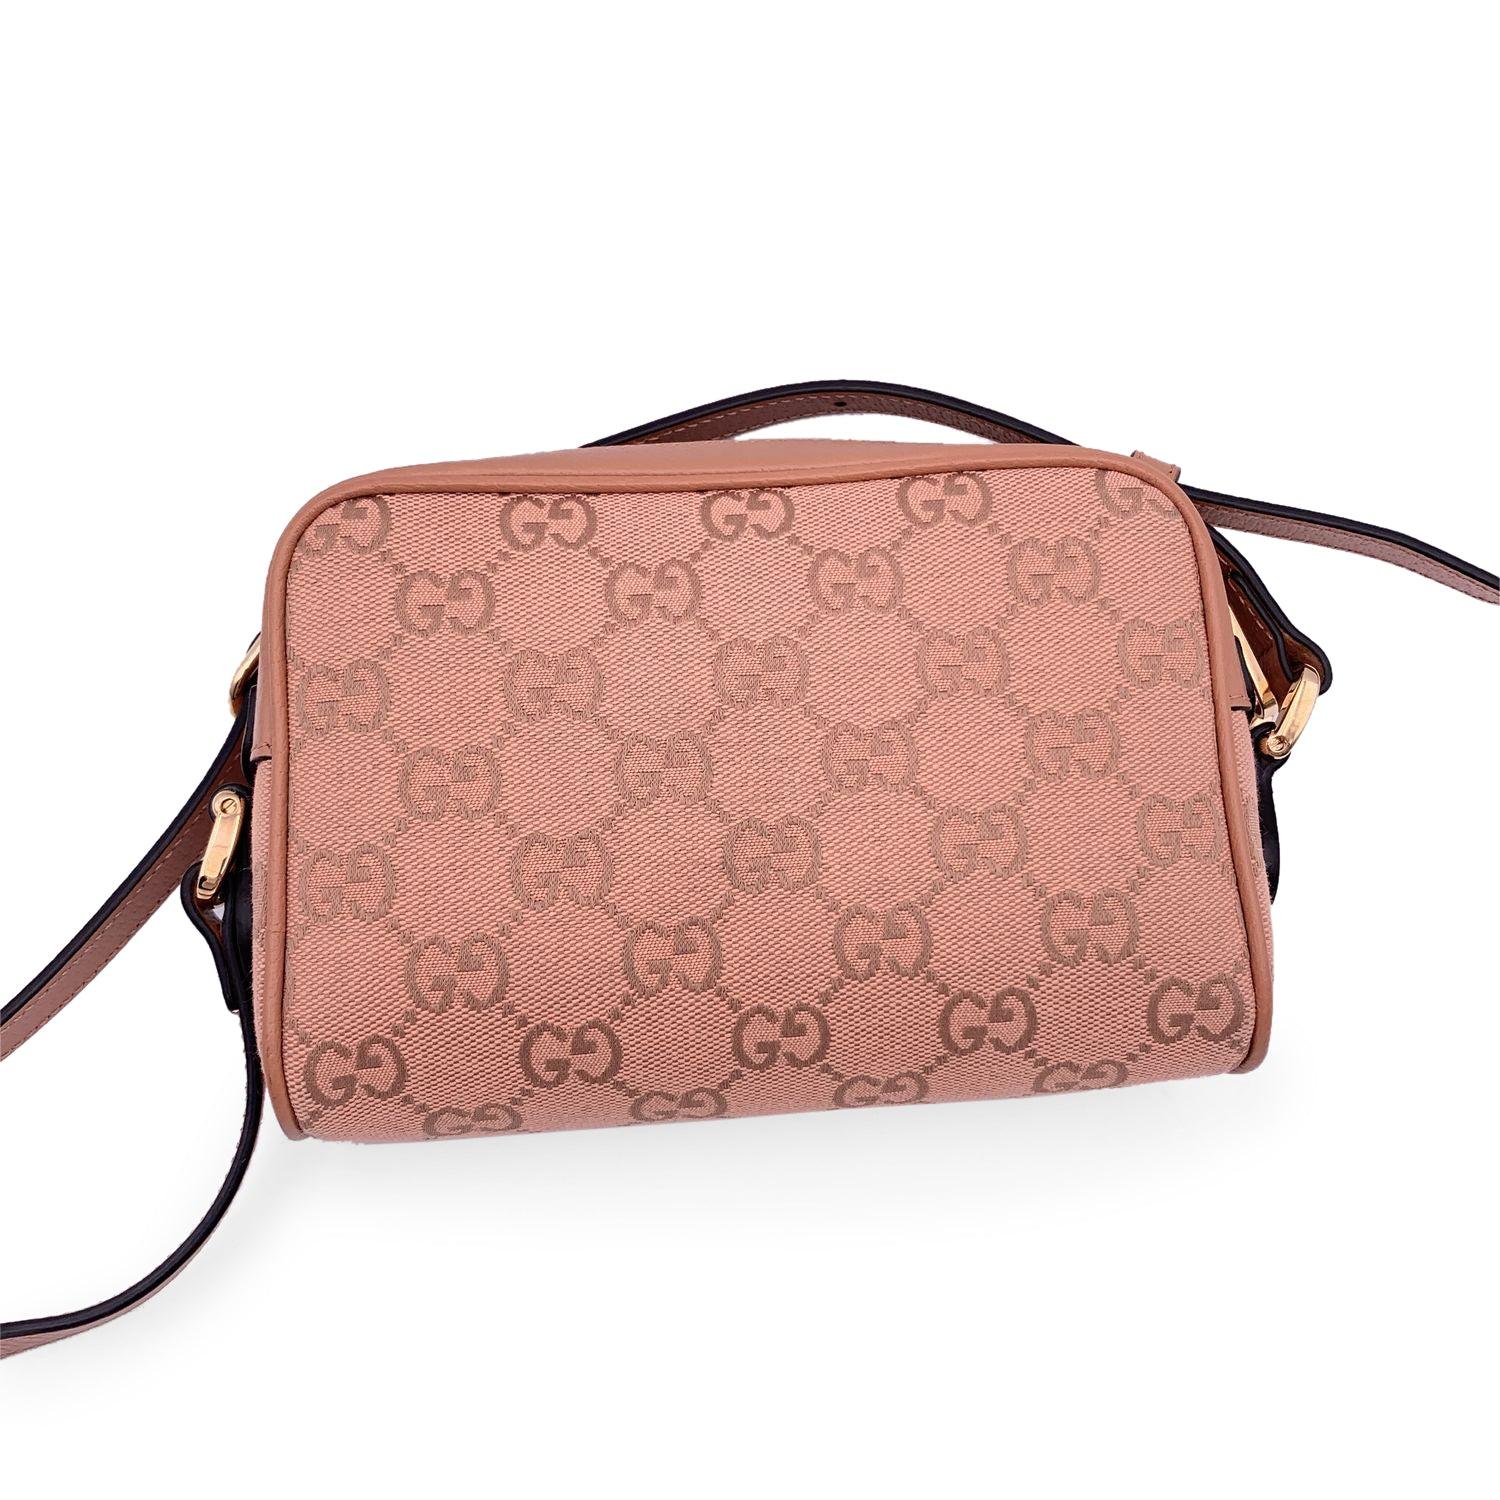 This beautiful Bag will come with a Certificate of Authenticity provided by Entrupy. The certificate will be provided at no further cost Beautiful GUCCI Ophidia mini crossbody bag in pink GG monogram canvas and leather in pink with adjustable canvas